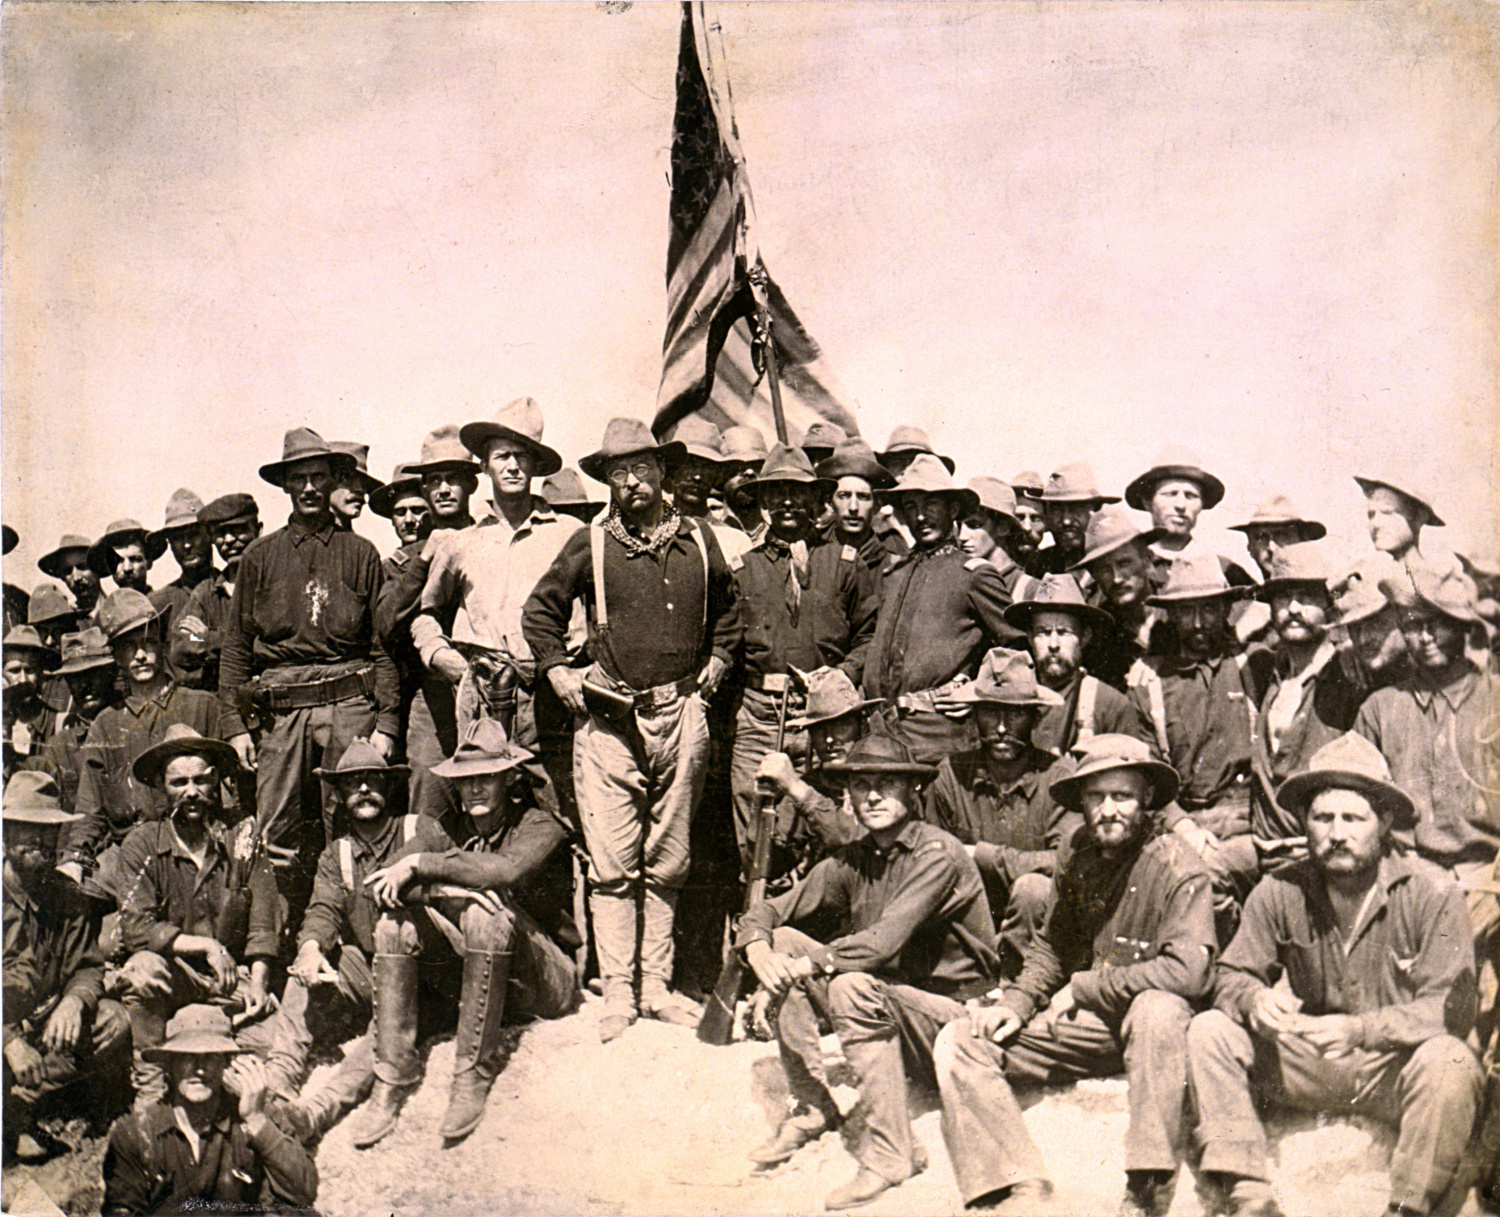 Before his Presidential days, Colonel Roosevelt led his famous Rough Riders cavalry regiment in battle during the Spanish-American War. (public domain, Wikimedia Commons/William Dinwiddie)